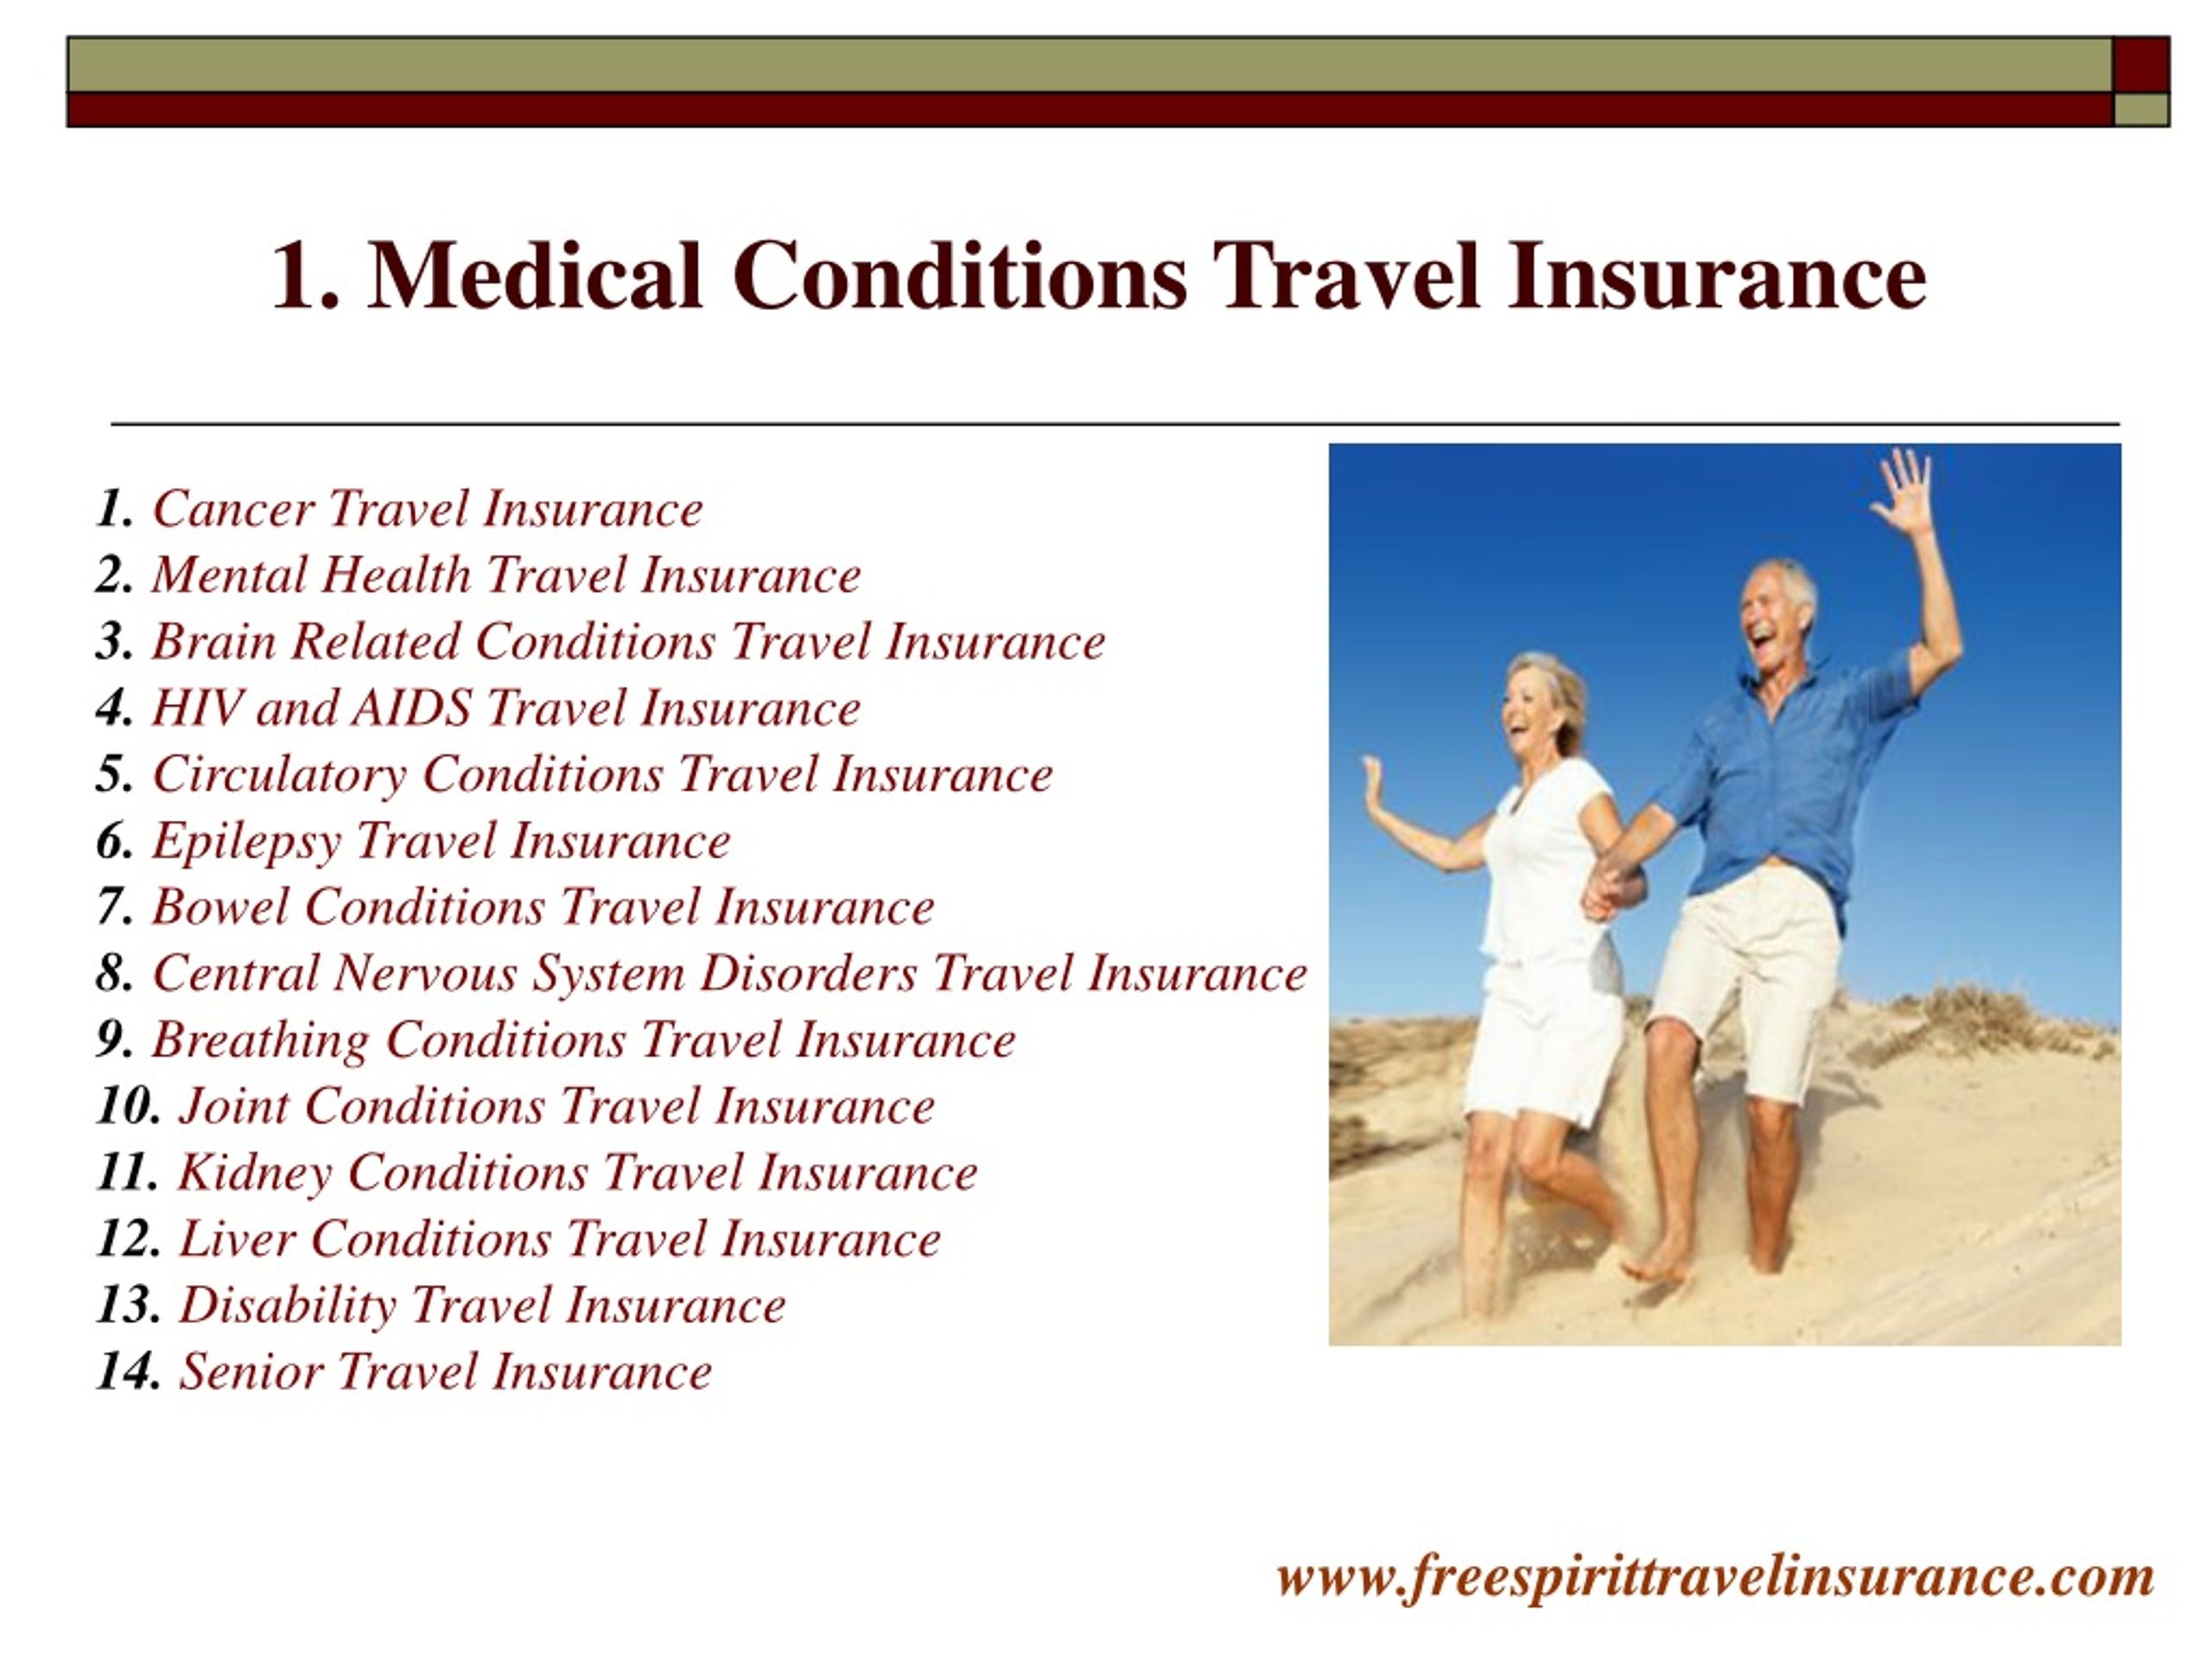 specialist travel insurance for heart conditions